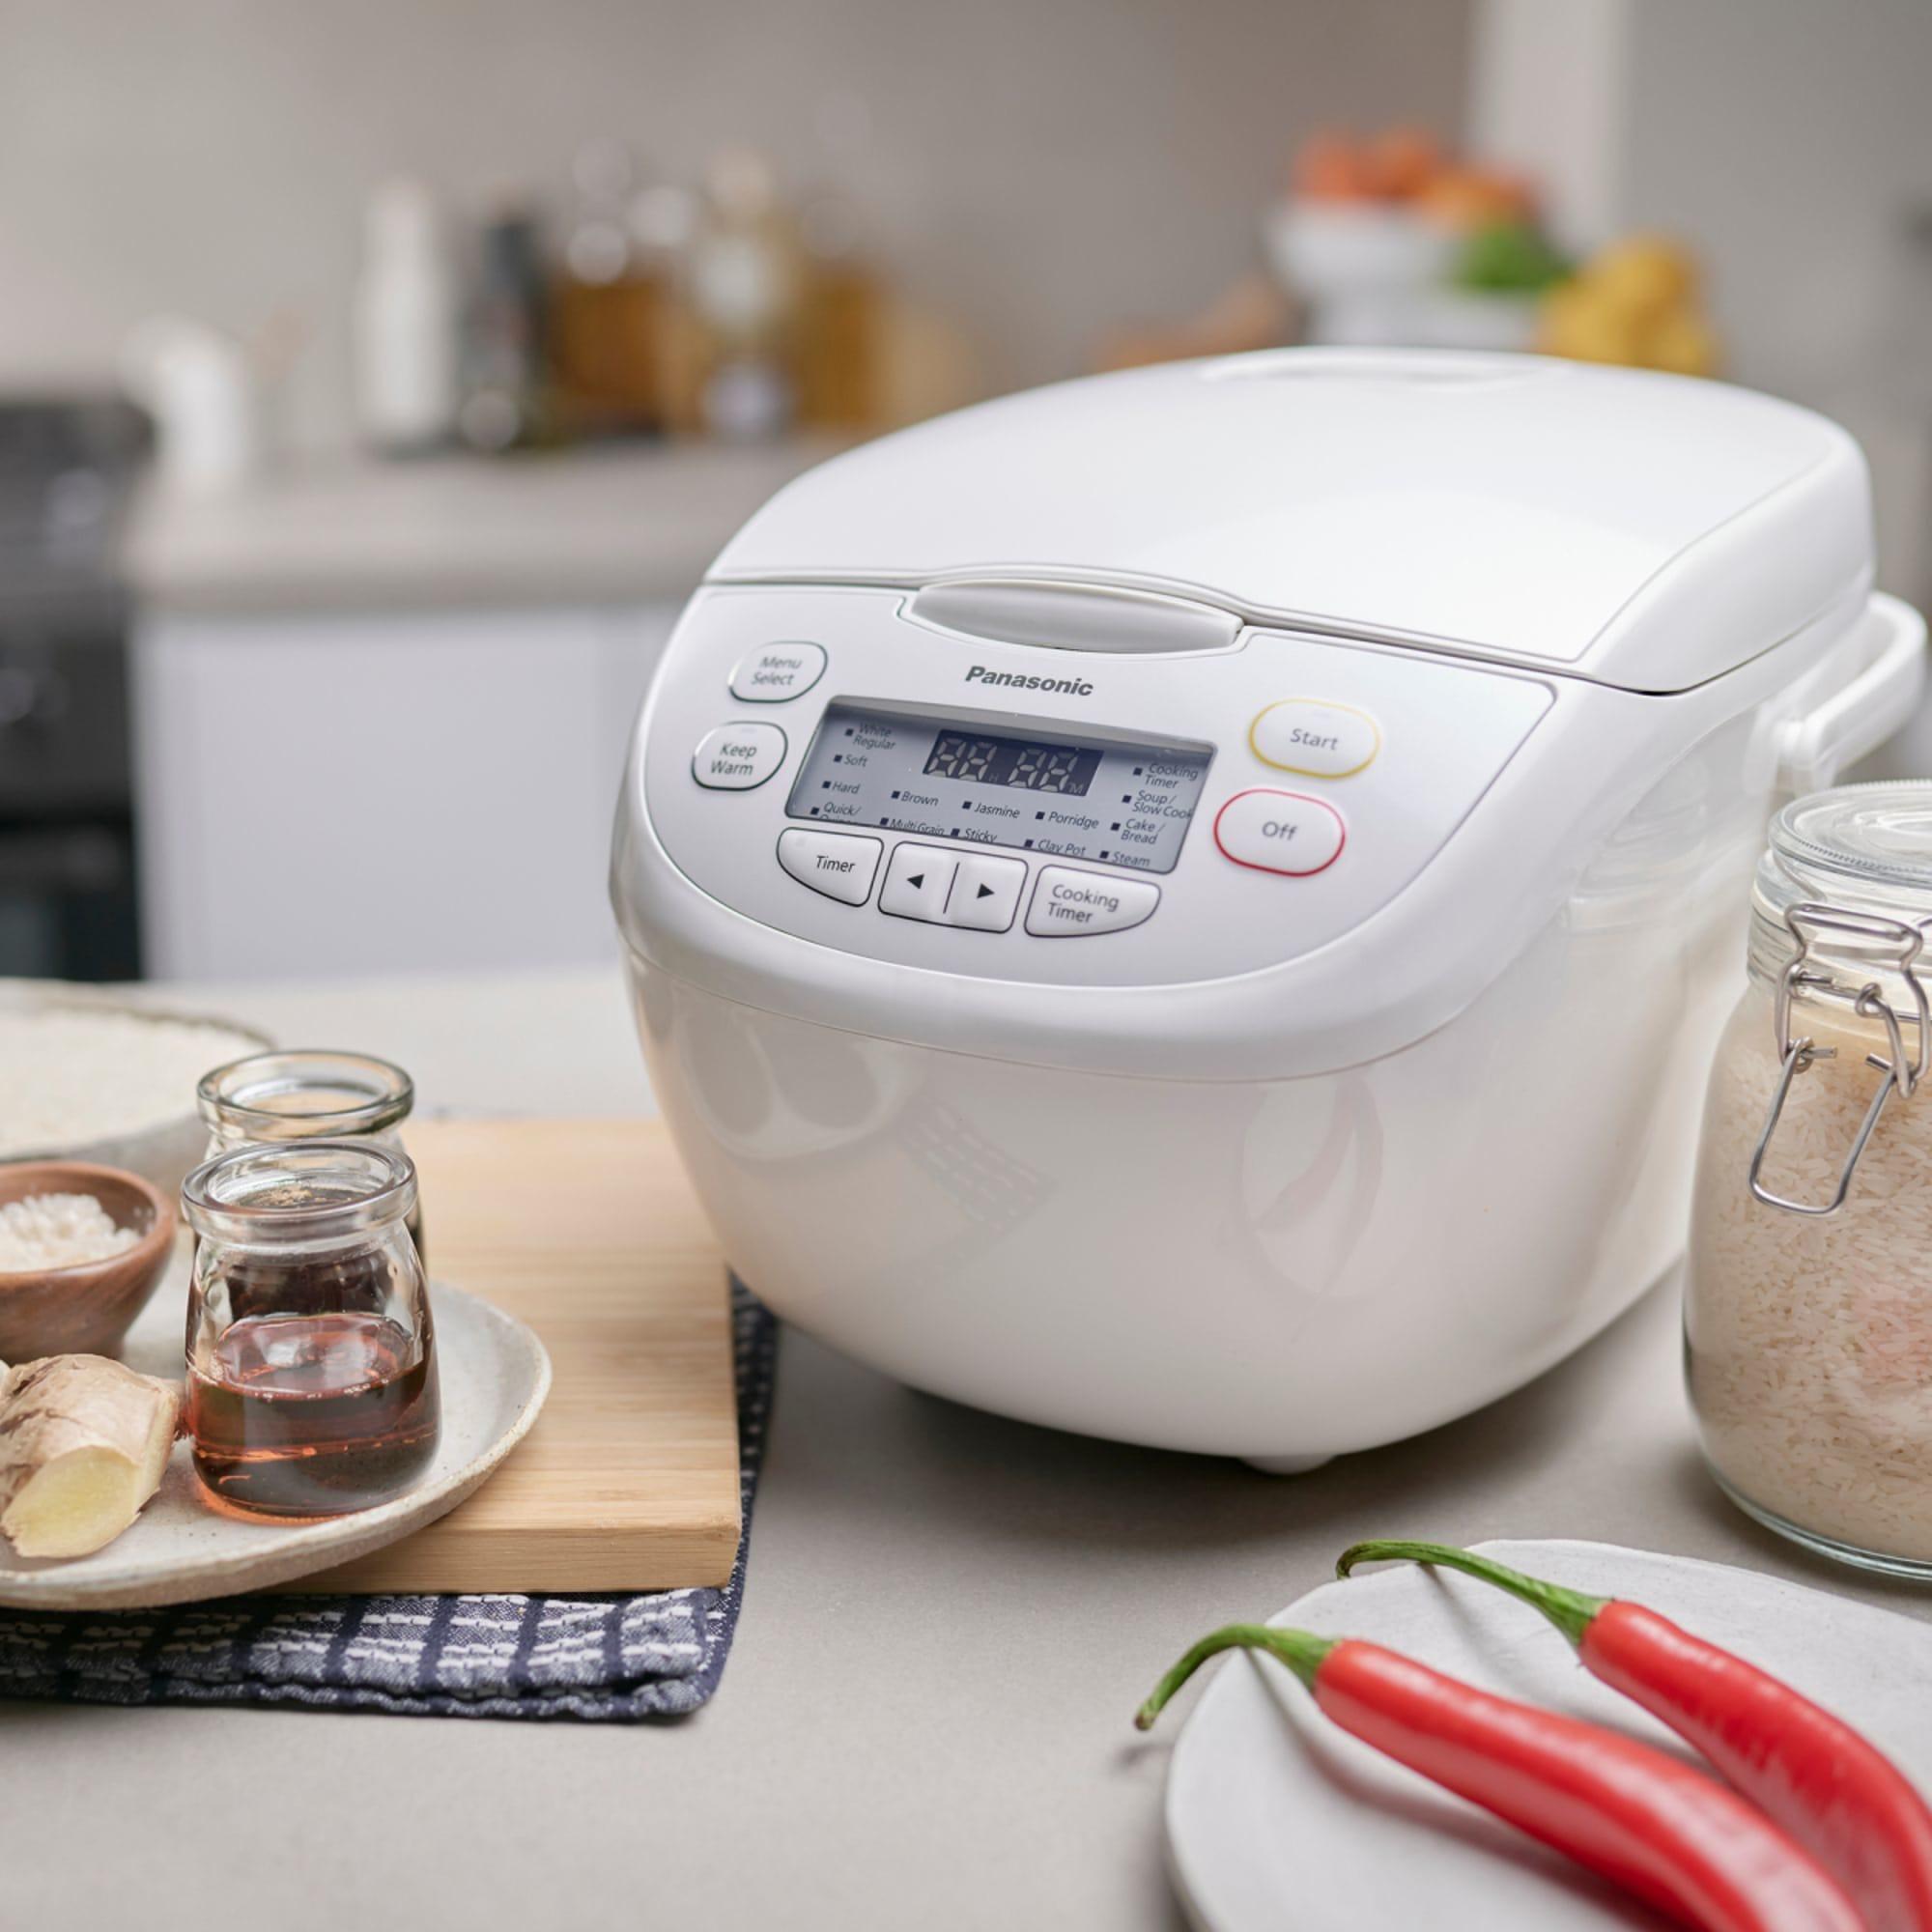 Panasonic Multi Function Rice Cooker 10 Cup White Image 6